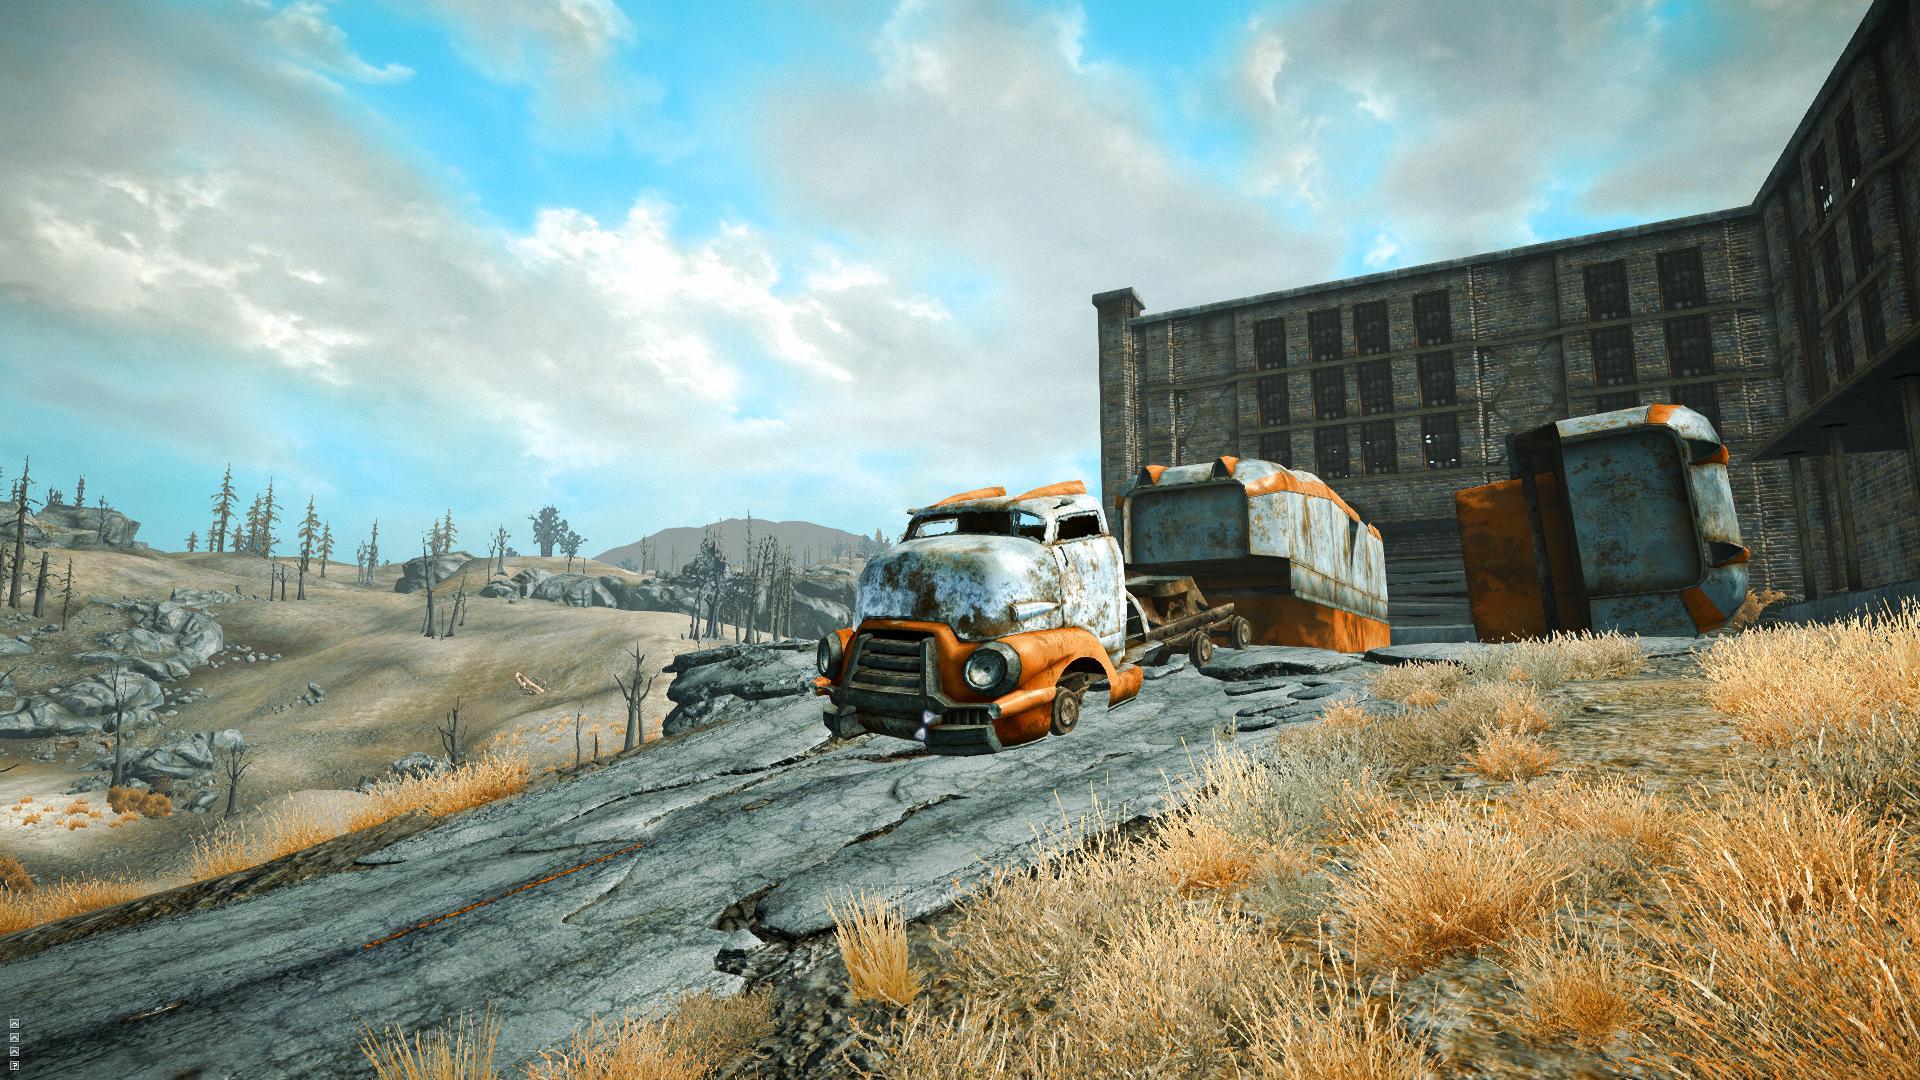 Fallout new enb. Фоллаут 4 ЕНБ. Fallout 3 "fo4 ENB V1.0". ENB Reshade Fallout 3. Шейдеры для фоллаут 3.